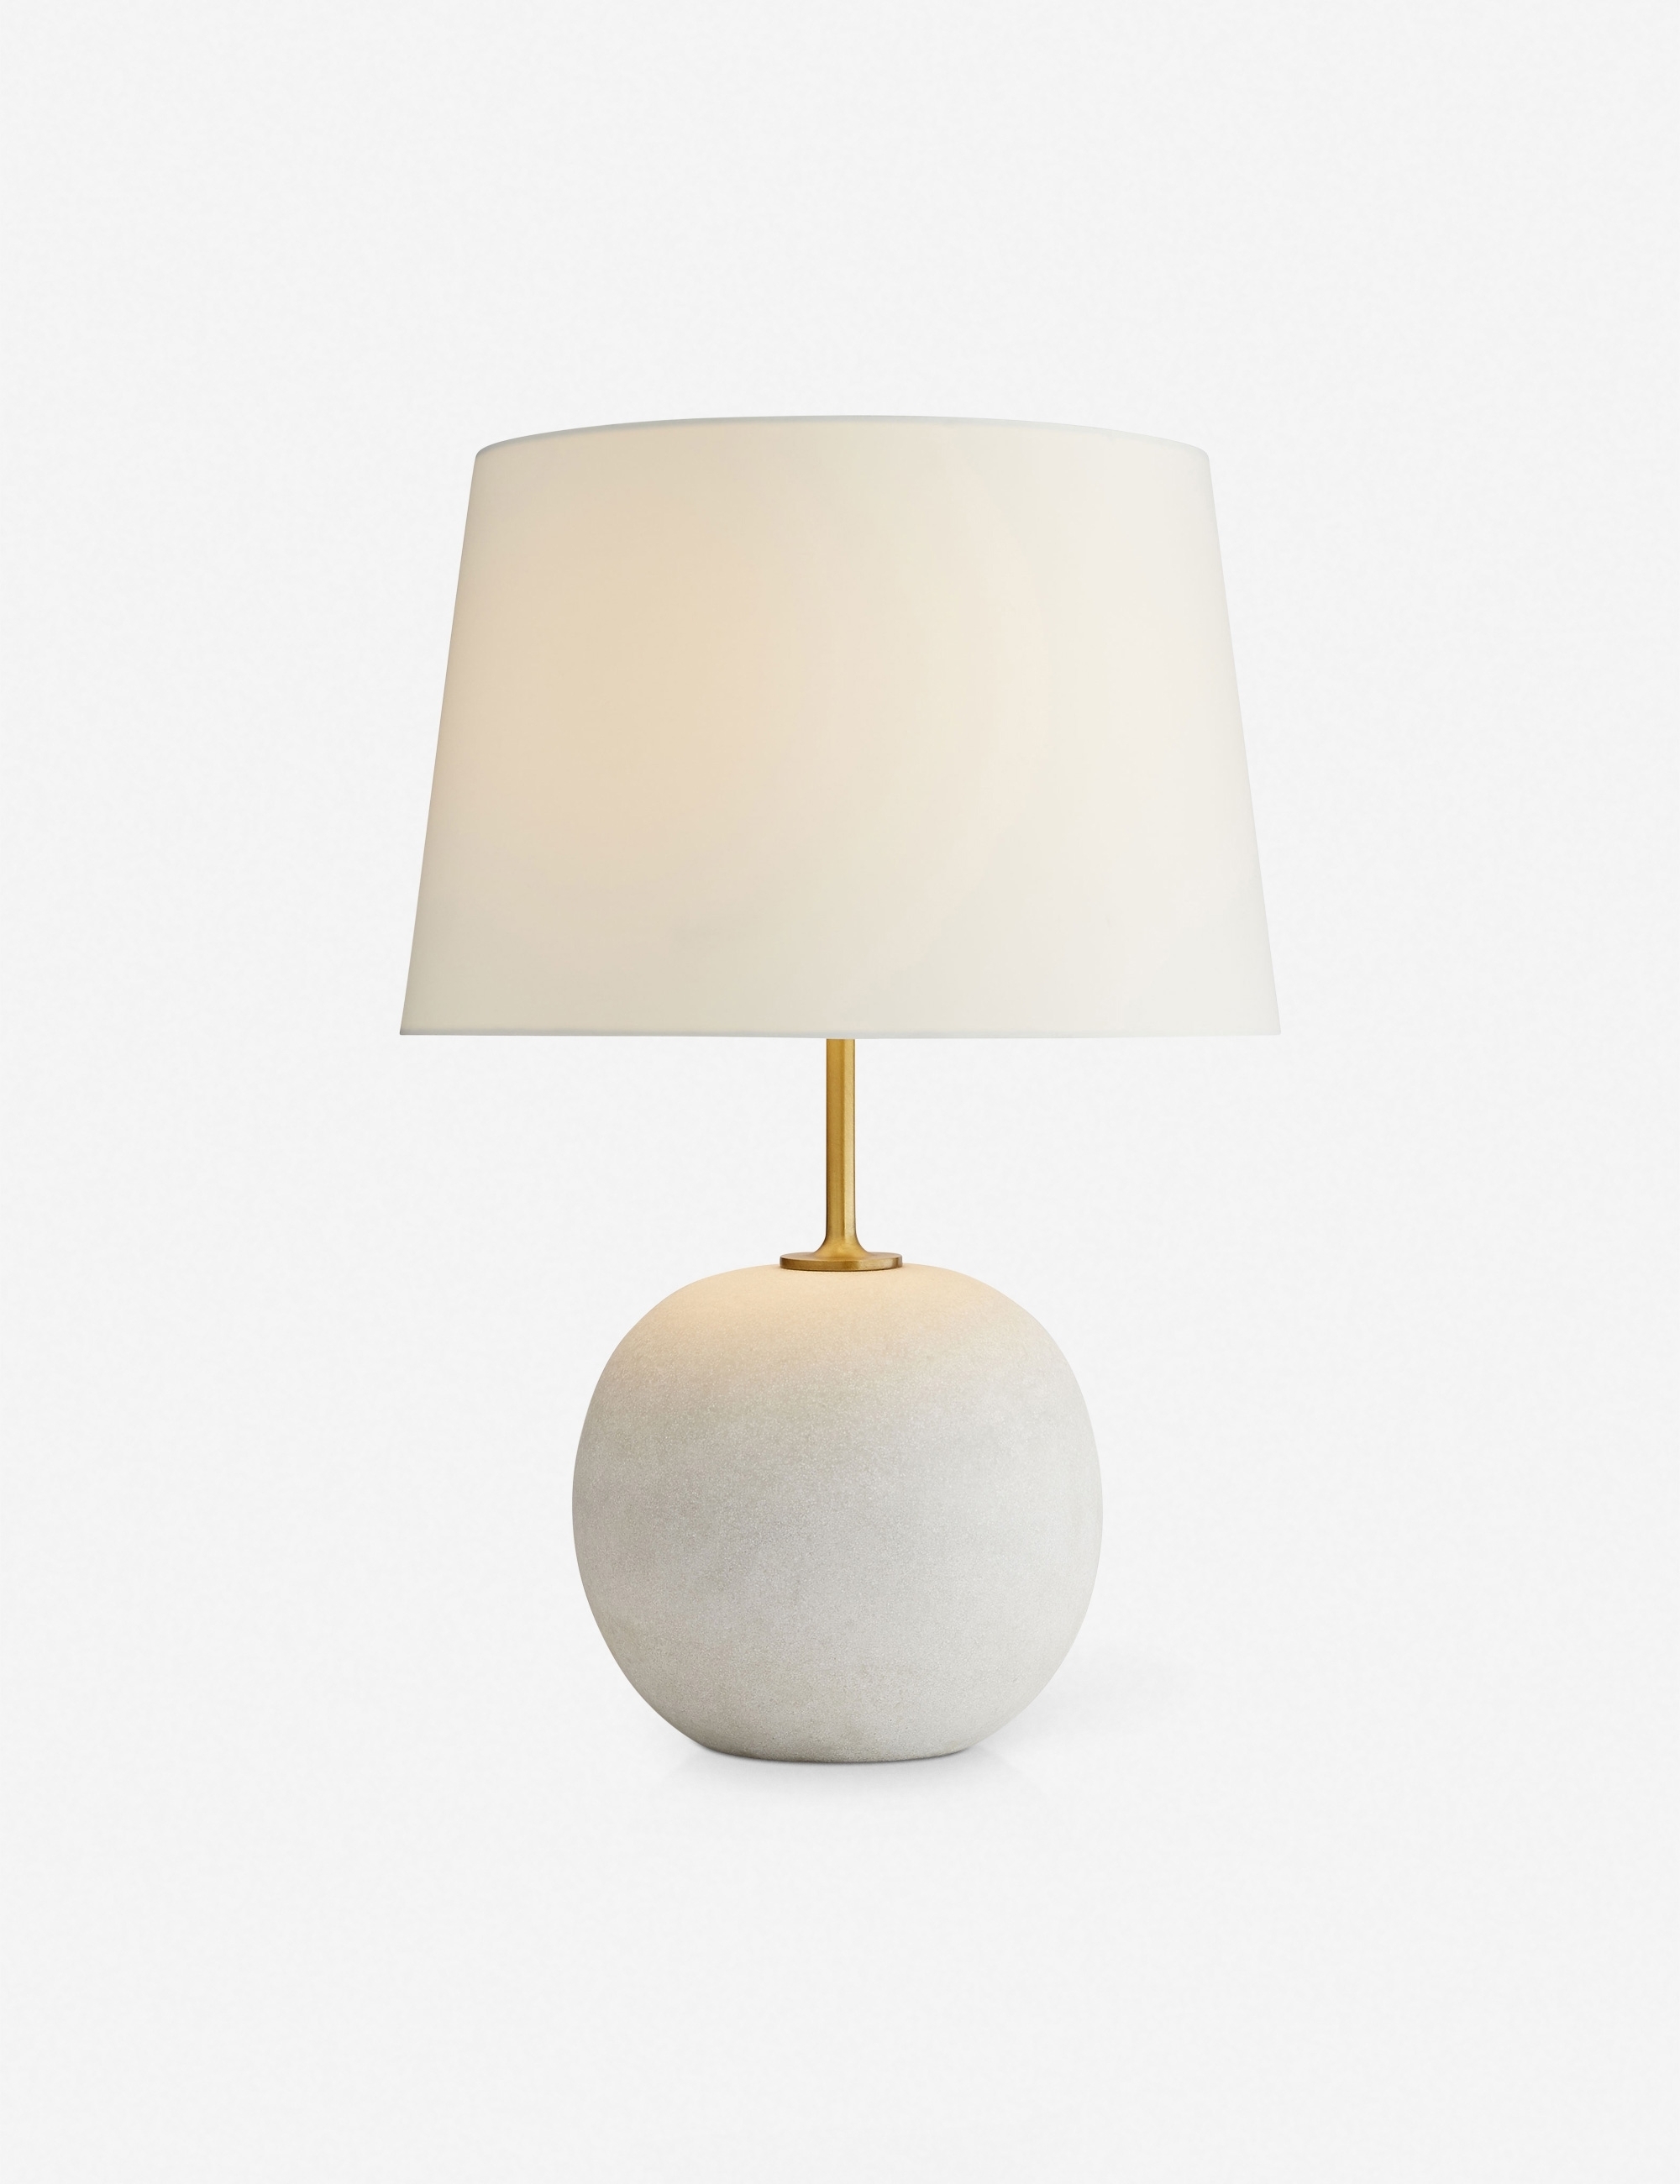 Colton Table Lamp by Arteriors - Image 2